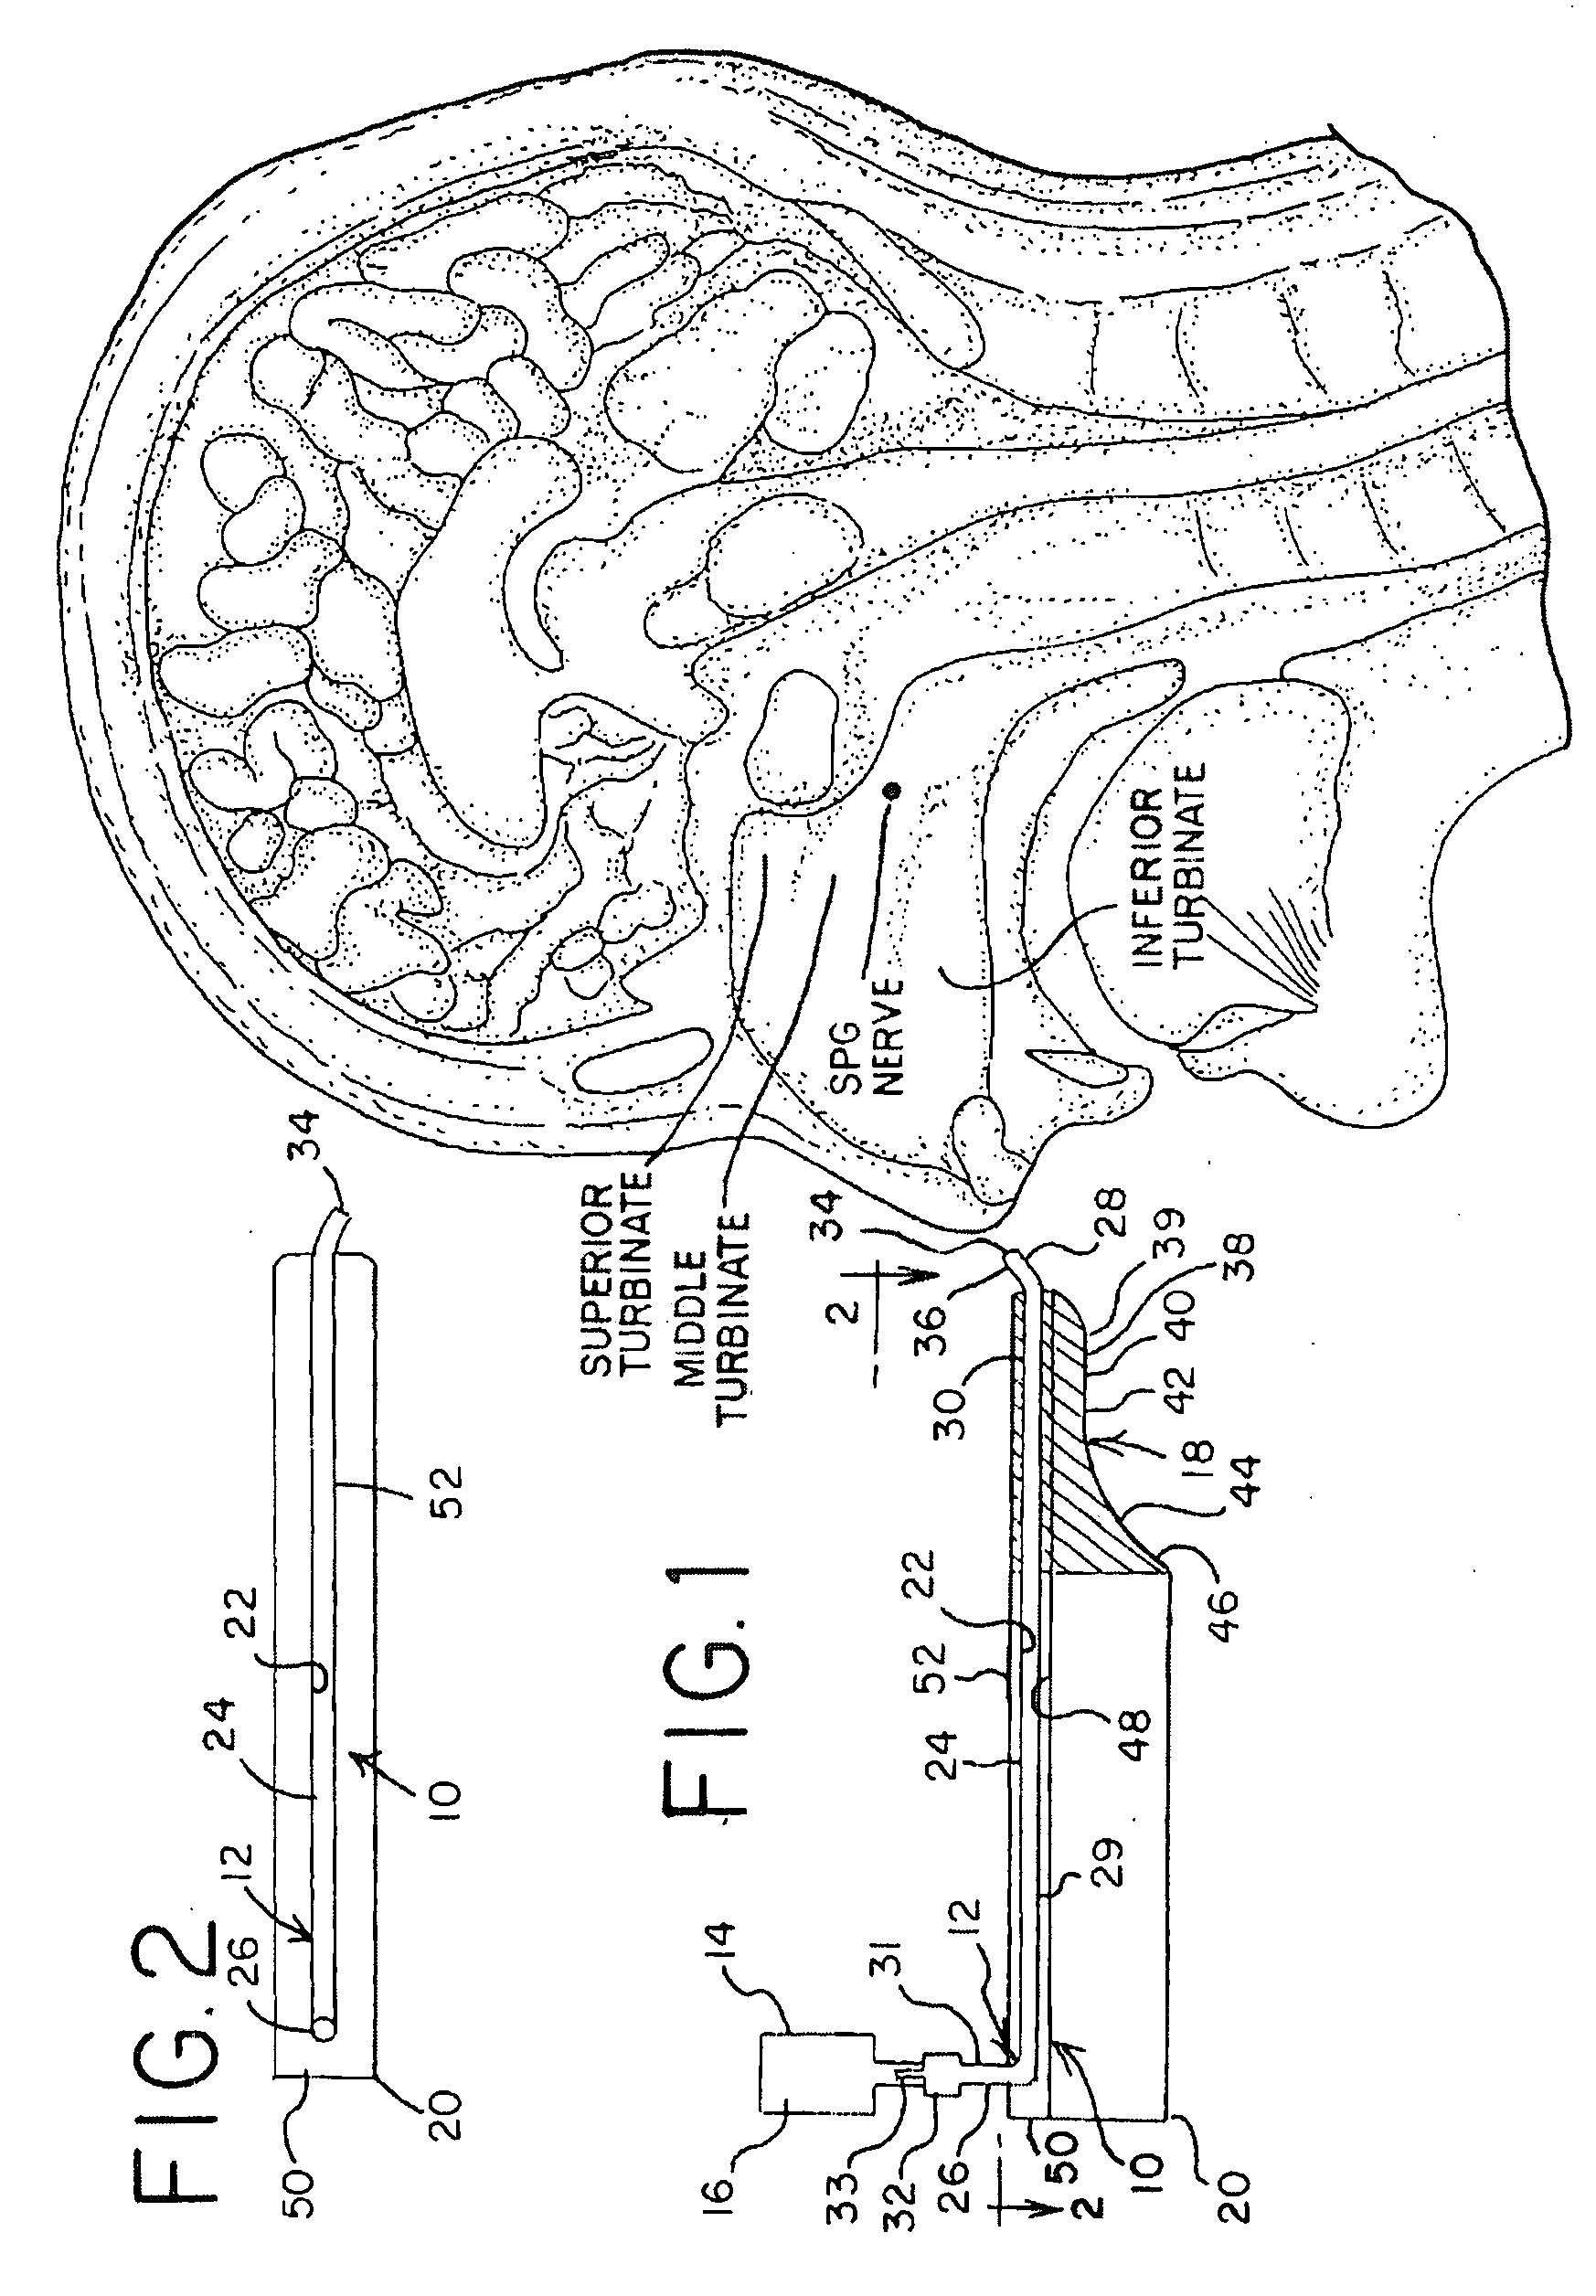 Apparatus and Method for Controlling Headaches